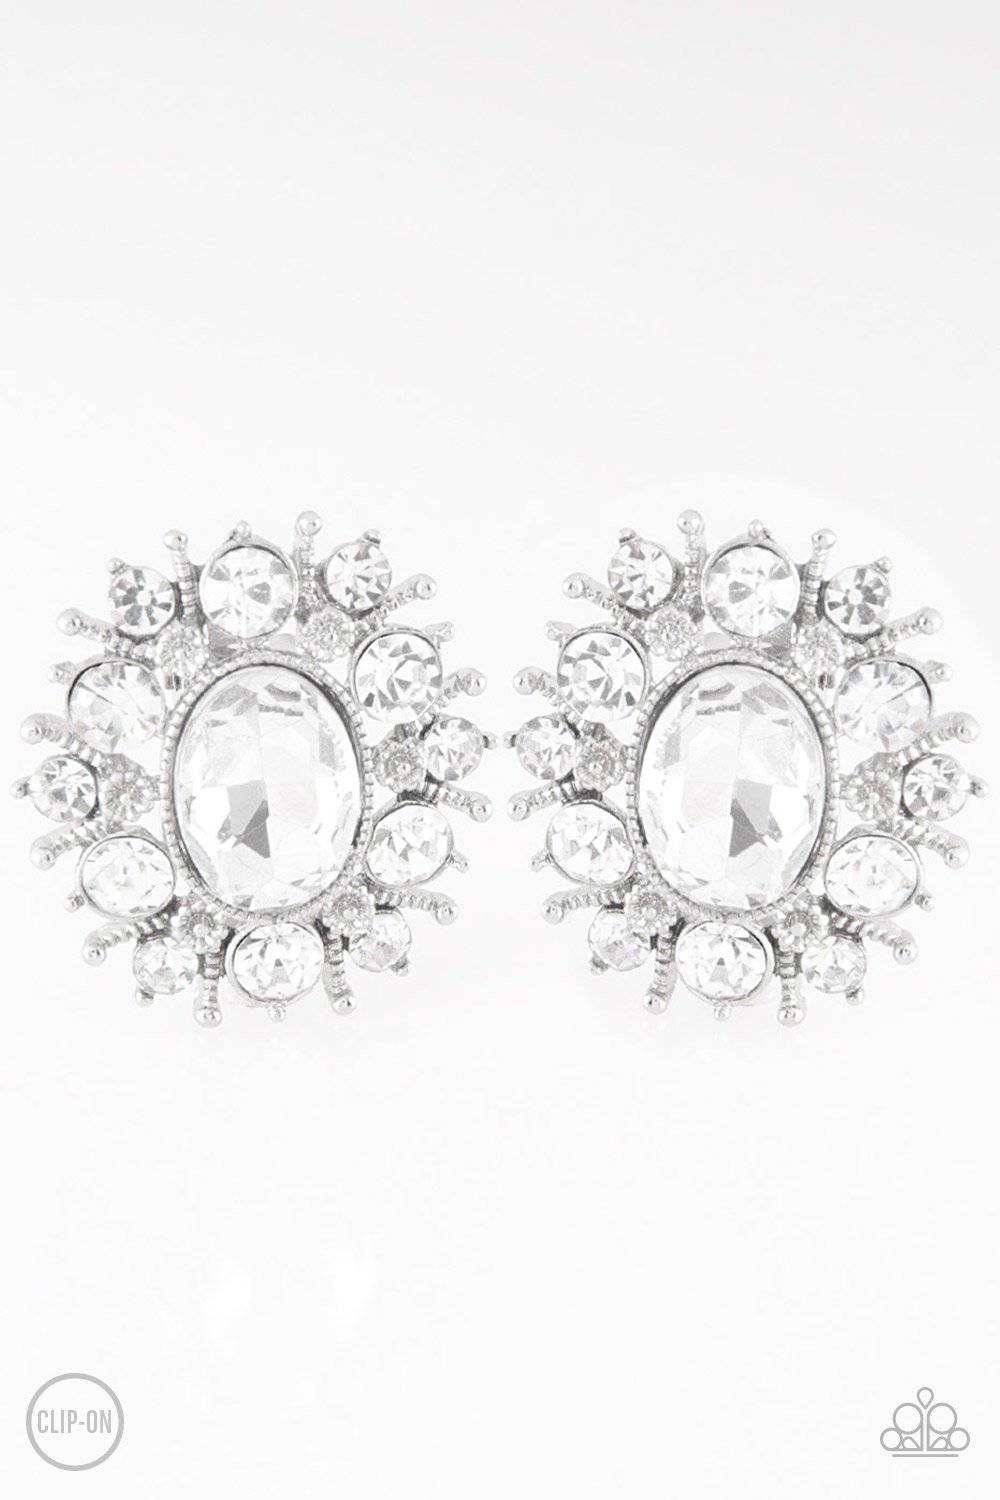 Serious Star Power White Clip-on Earrings - Paparazzi Accessories - GlaMarous Titi Jewels